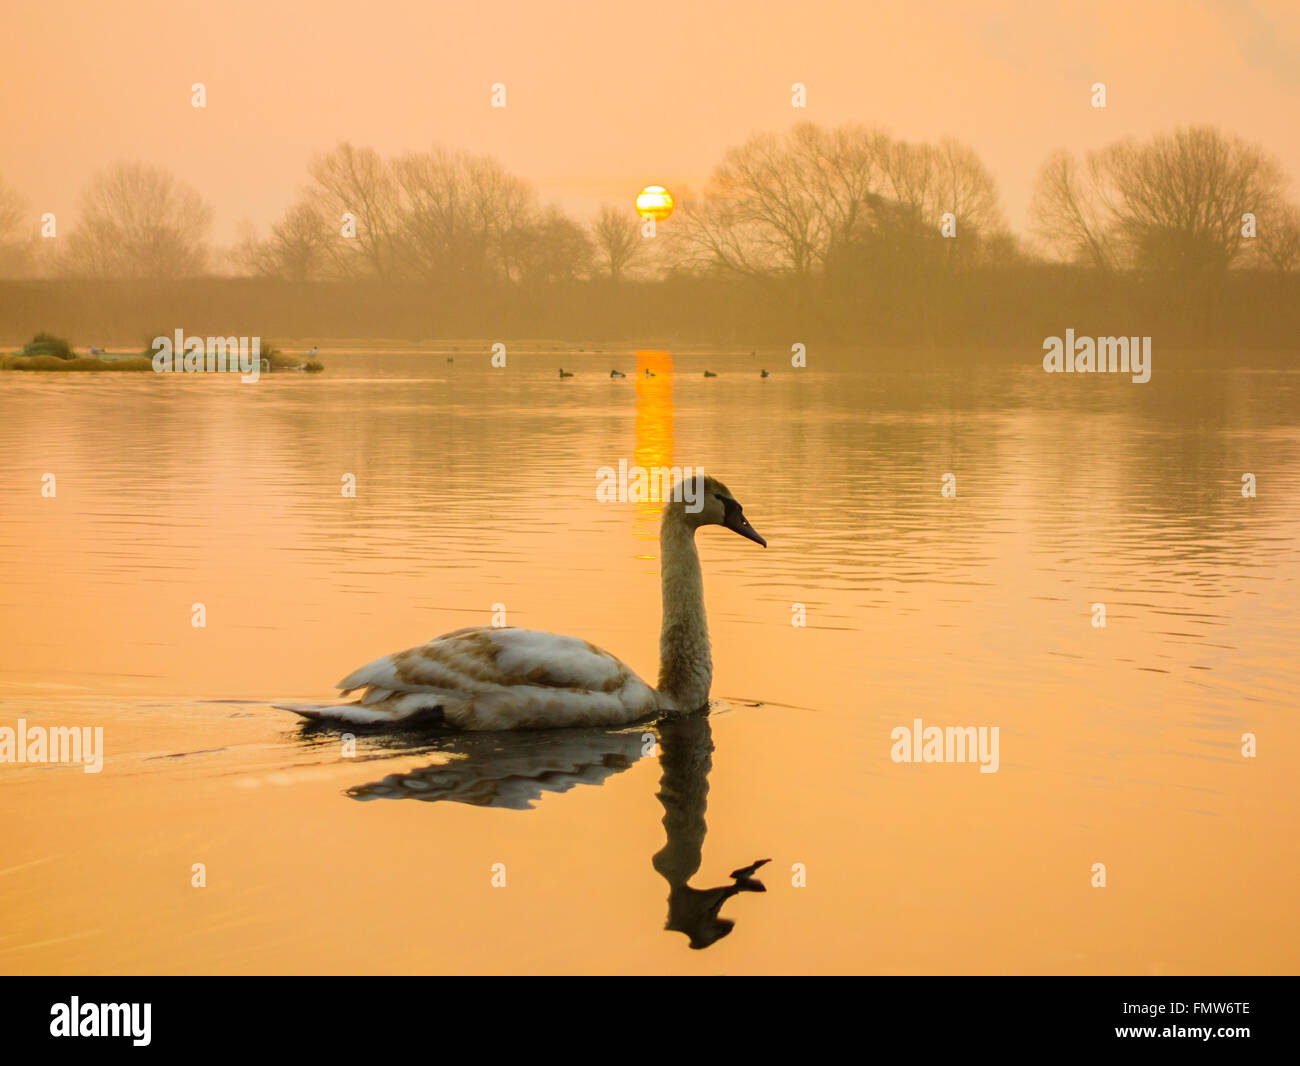 Billingham, north east England, UK, 13th March 2016. Weather: The sun rises over Charltons Pond in Billingham on a glorious spring Sunday in north east England. With high pressure forecast for most of the UK for the coming days, most areas are forecast to see settled, dry weather with some spring sunshine at times. Credit:  Alan Dawson News/Alamy Live News Stock Photo